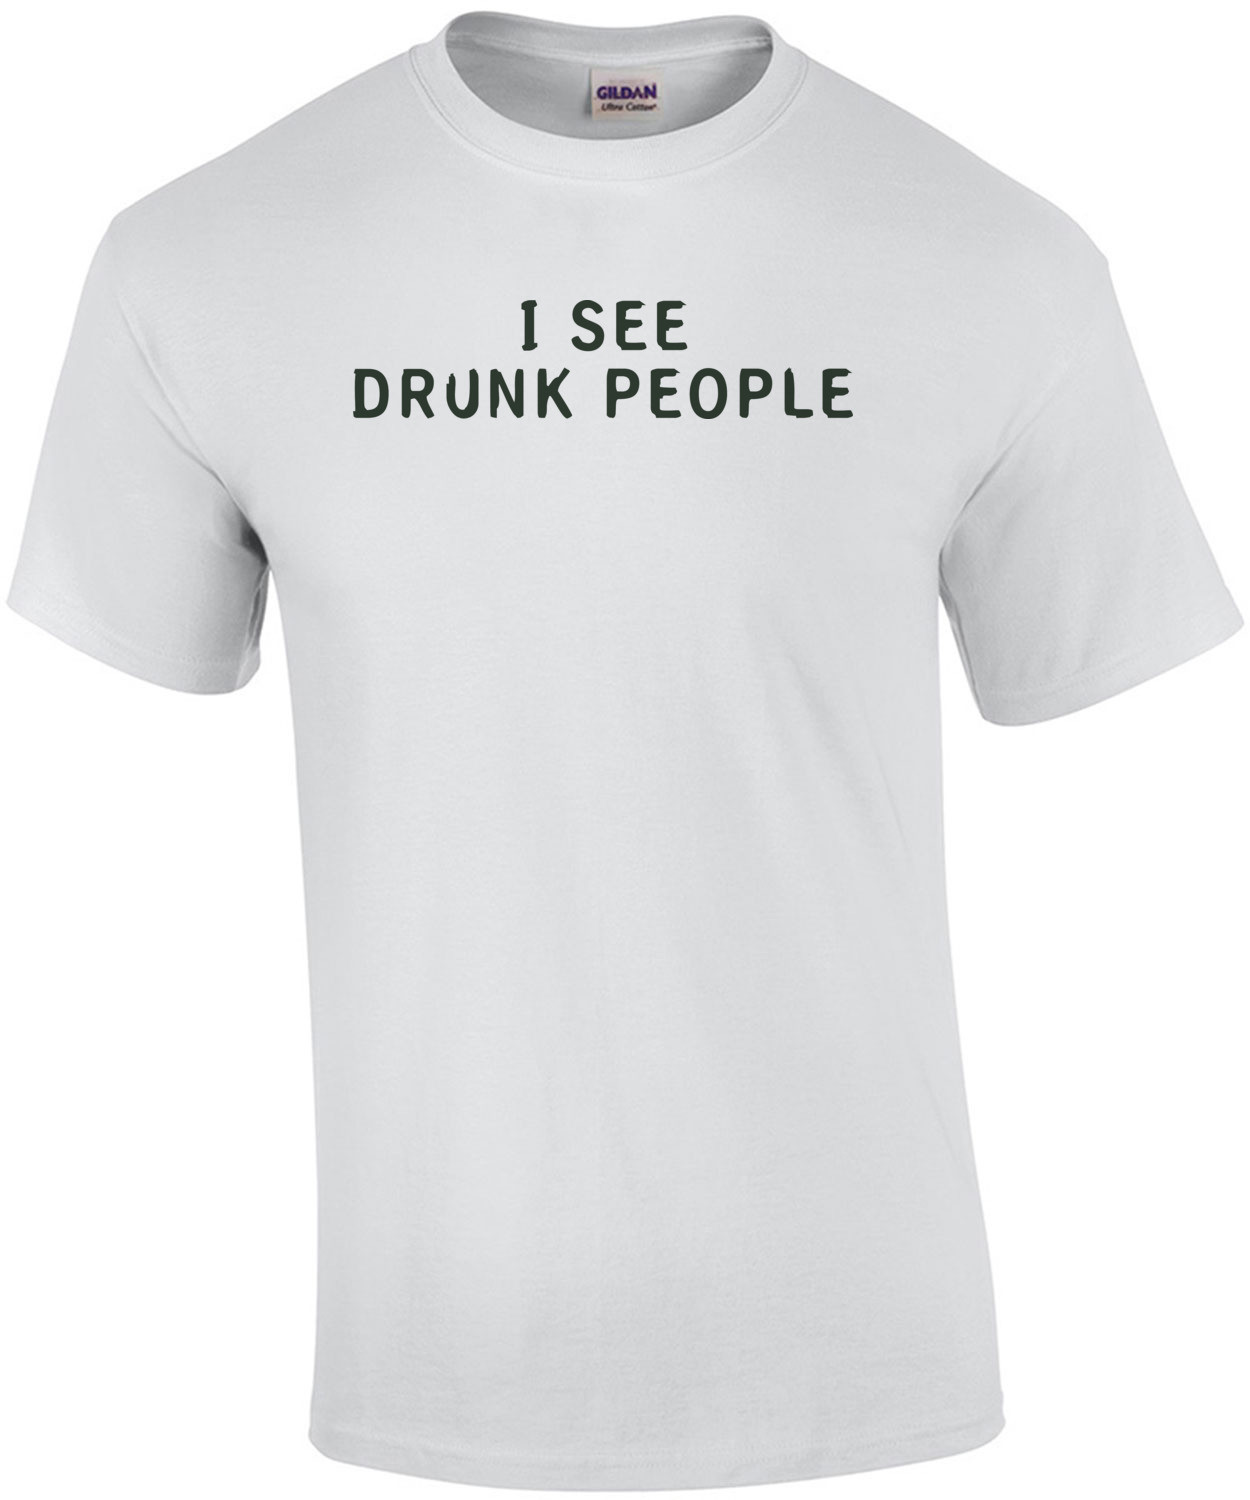 I See Drunk People T-shirt